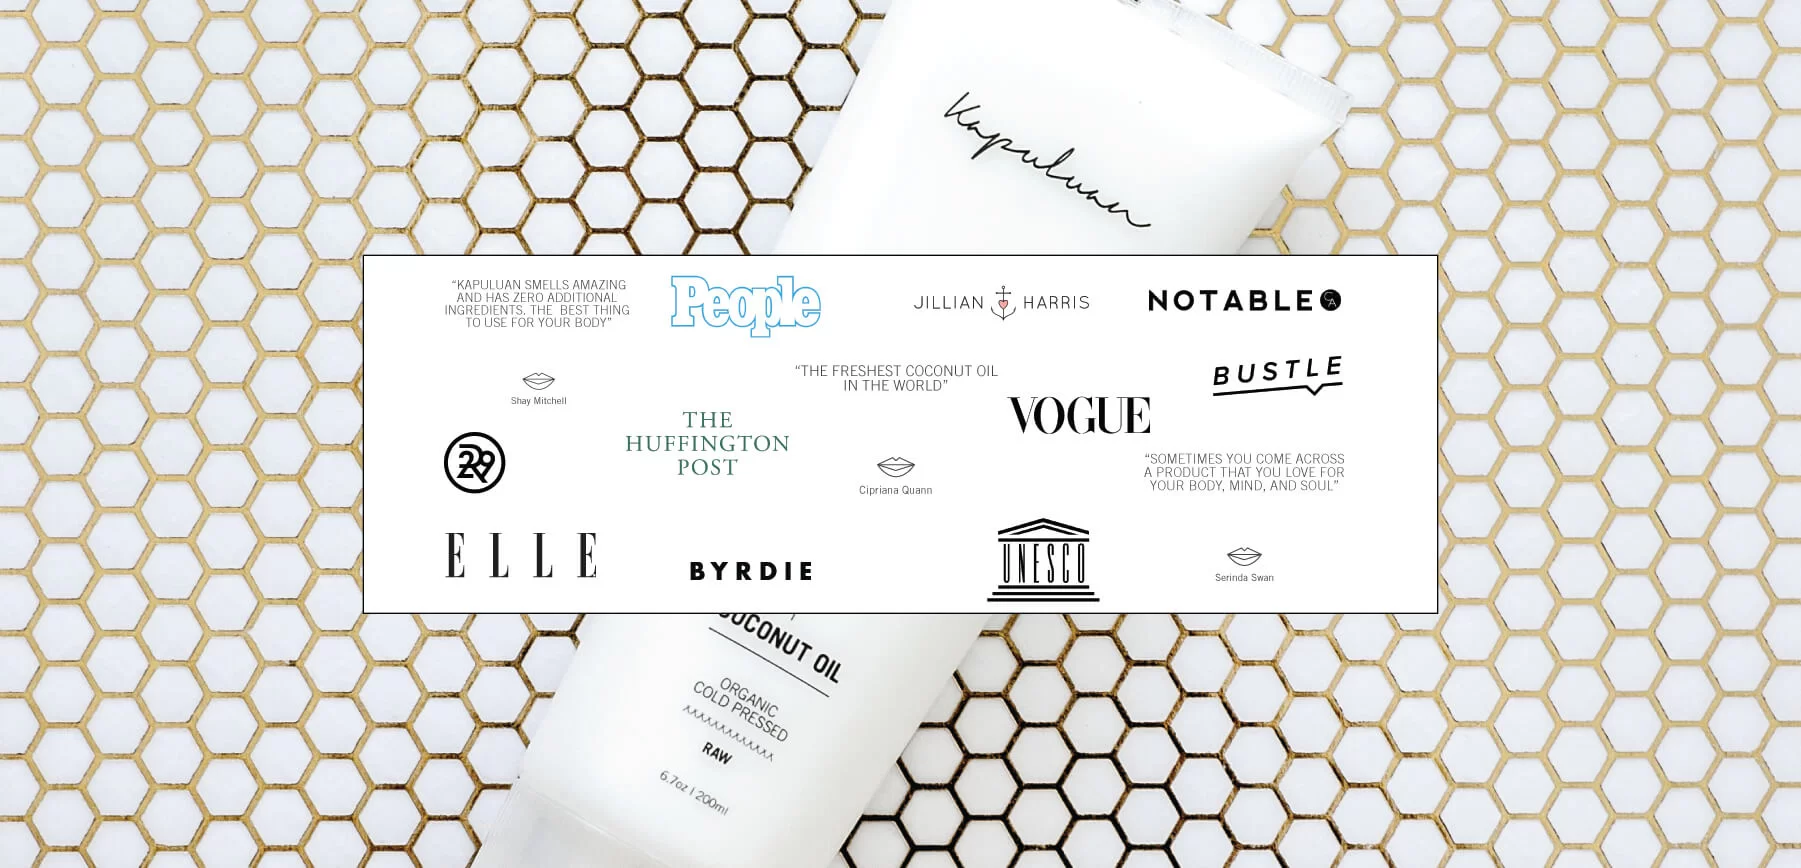 A collection of beauty product accolades from prestigious publications displayed alongside a sleek tube on a stylish coconut hexagon-patterned background.